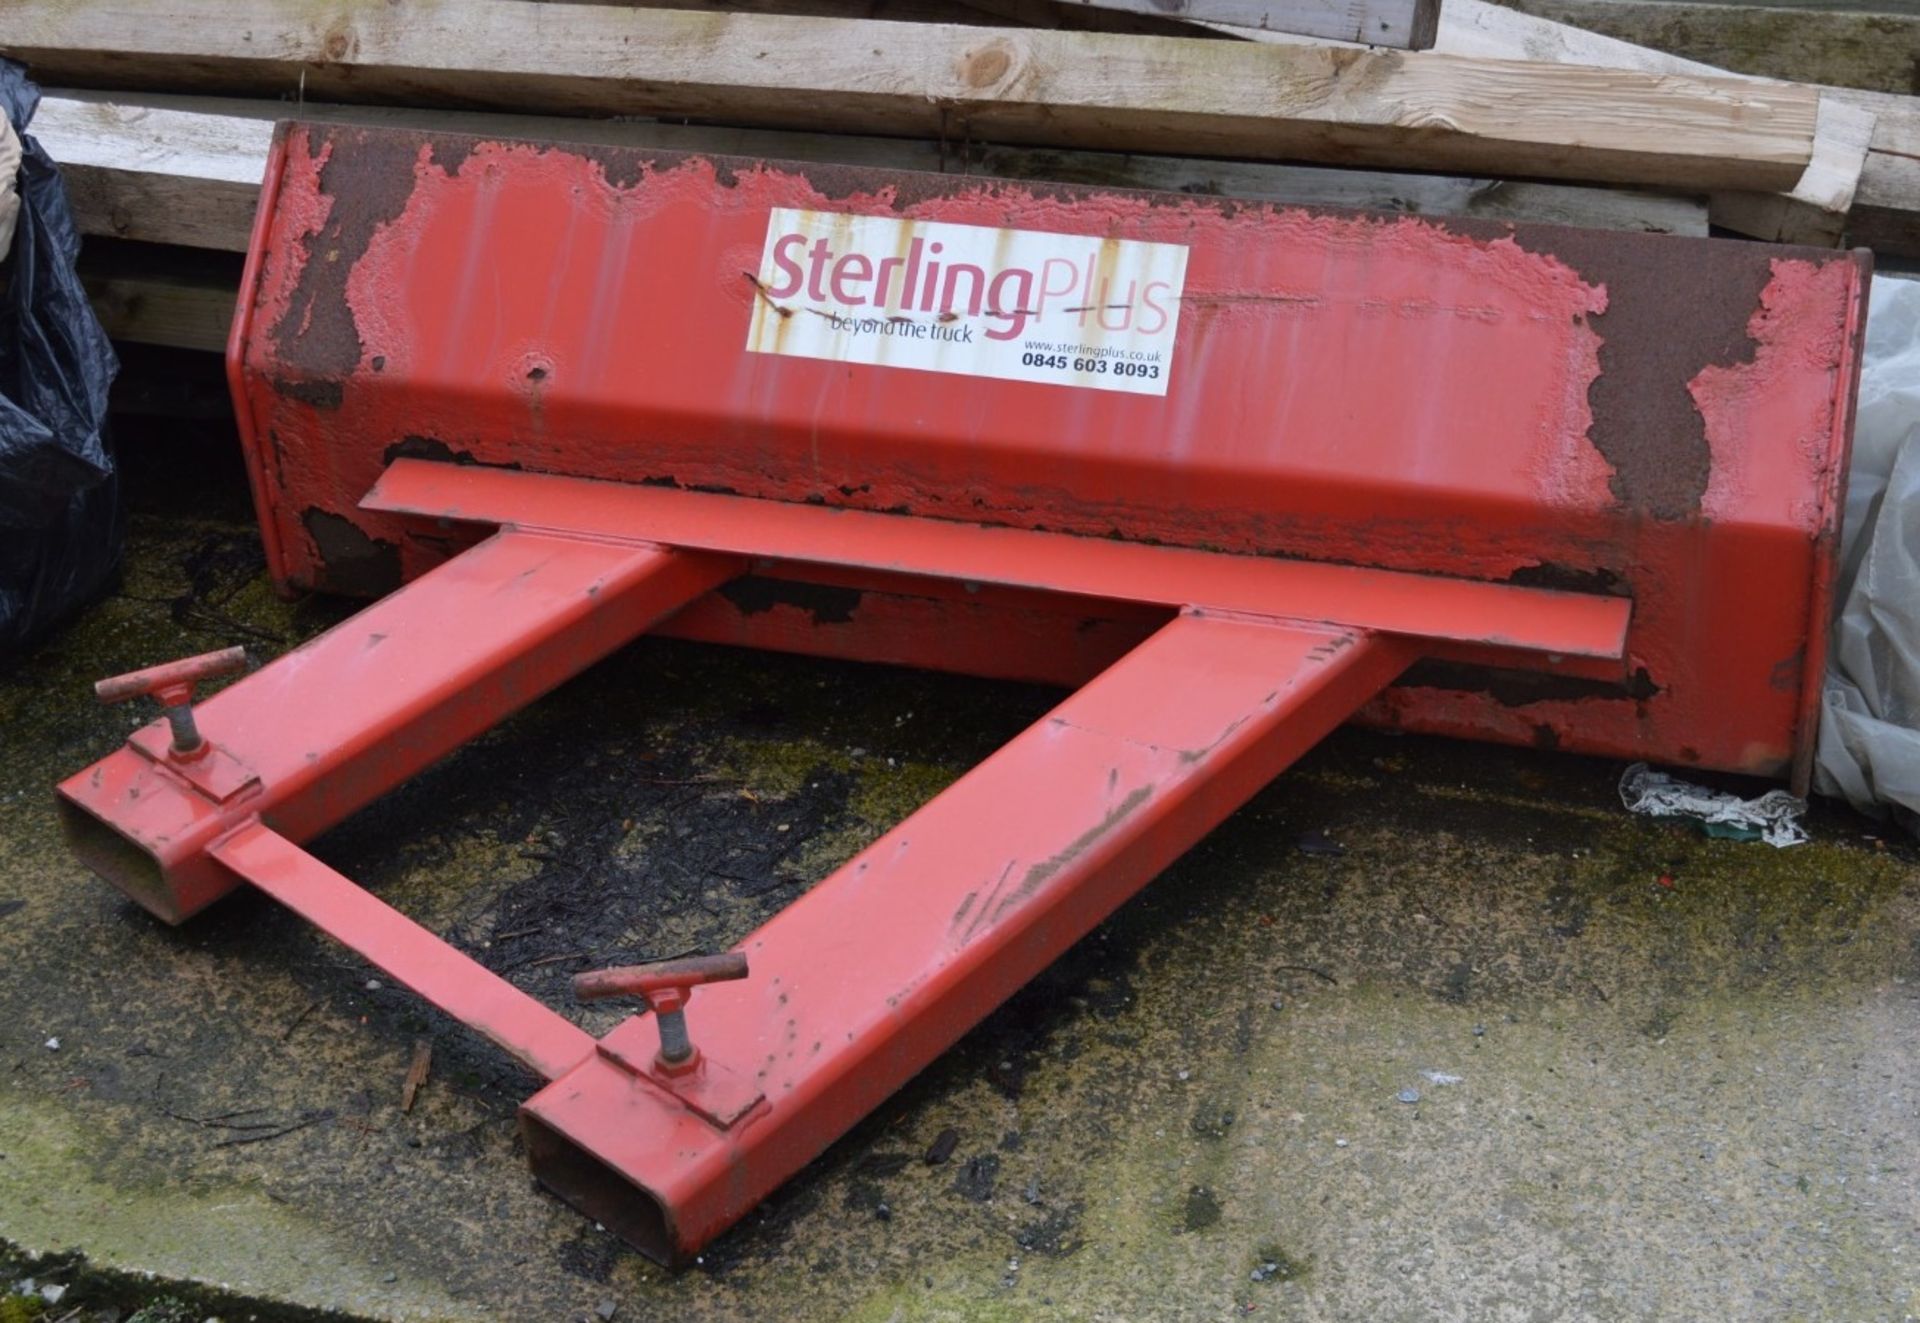 1 x Sterling Plus Forklift Truck Plough Attachment - Width 151 cms - Ref BB1639 OS - CL351 -